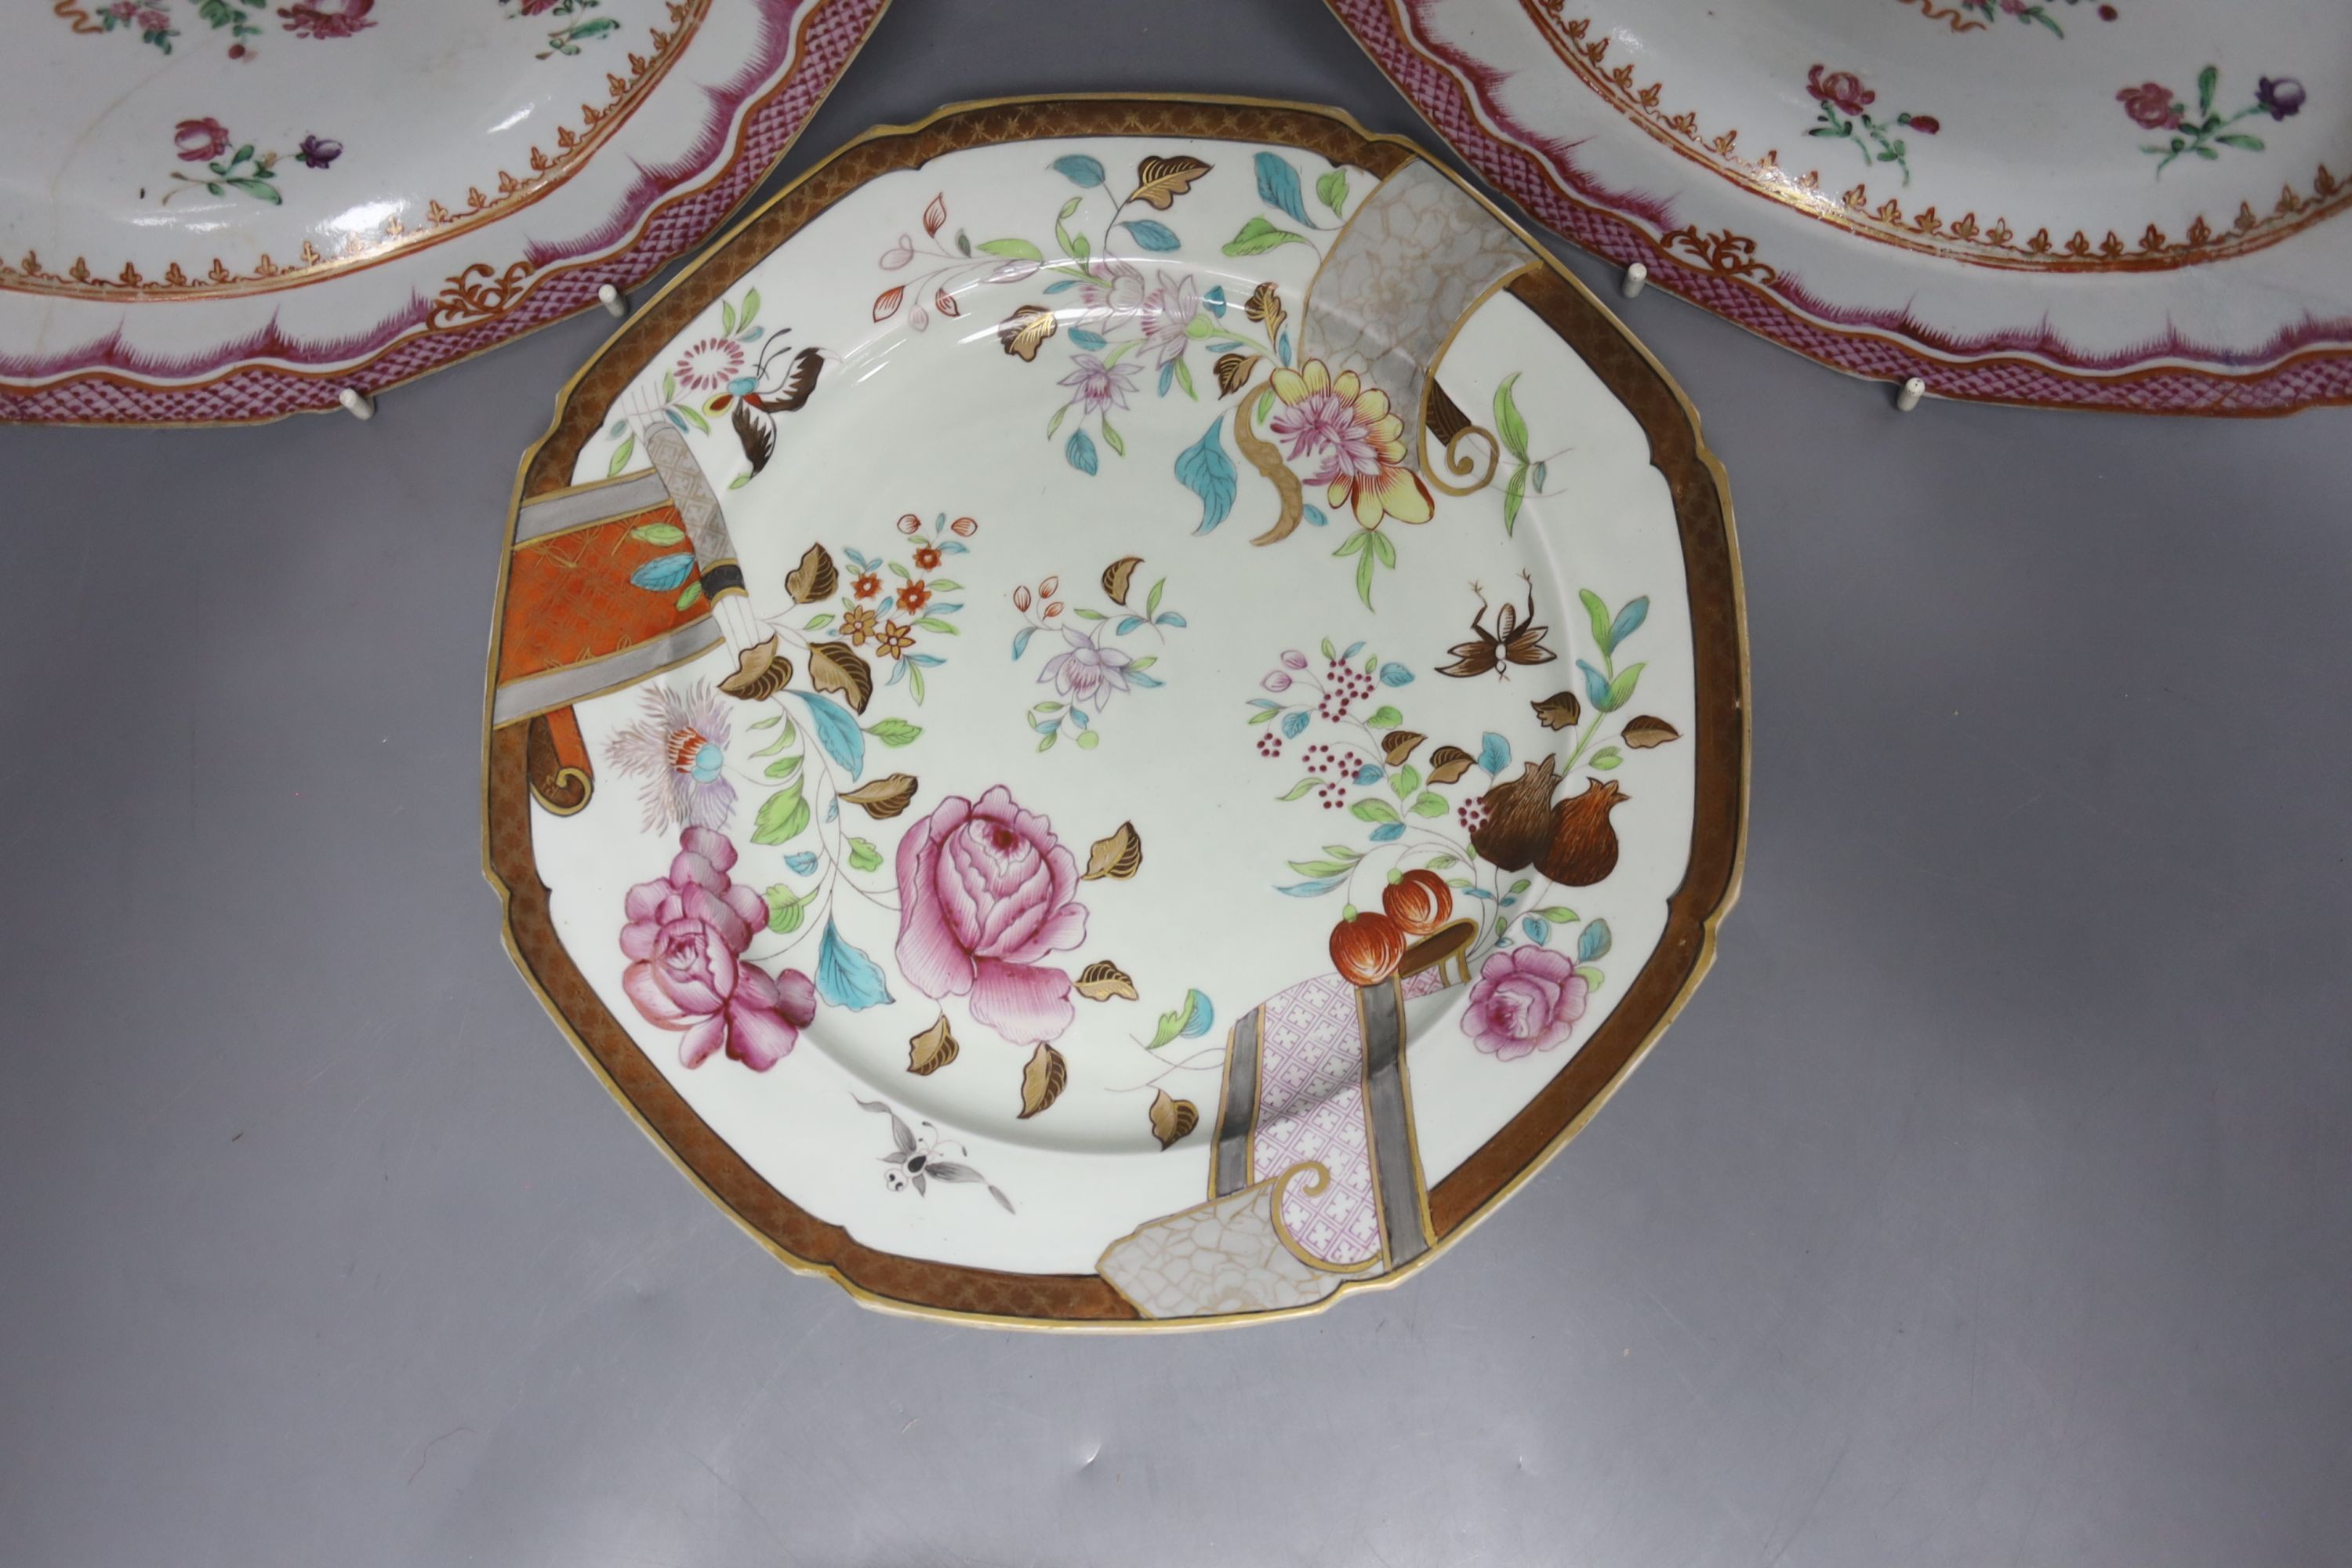 Four Chinese famille rose dishes or plates, 18th century and later, largest 24cm